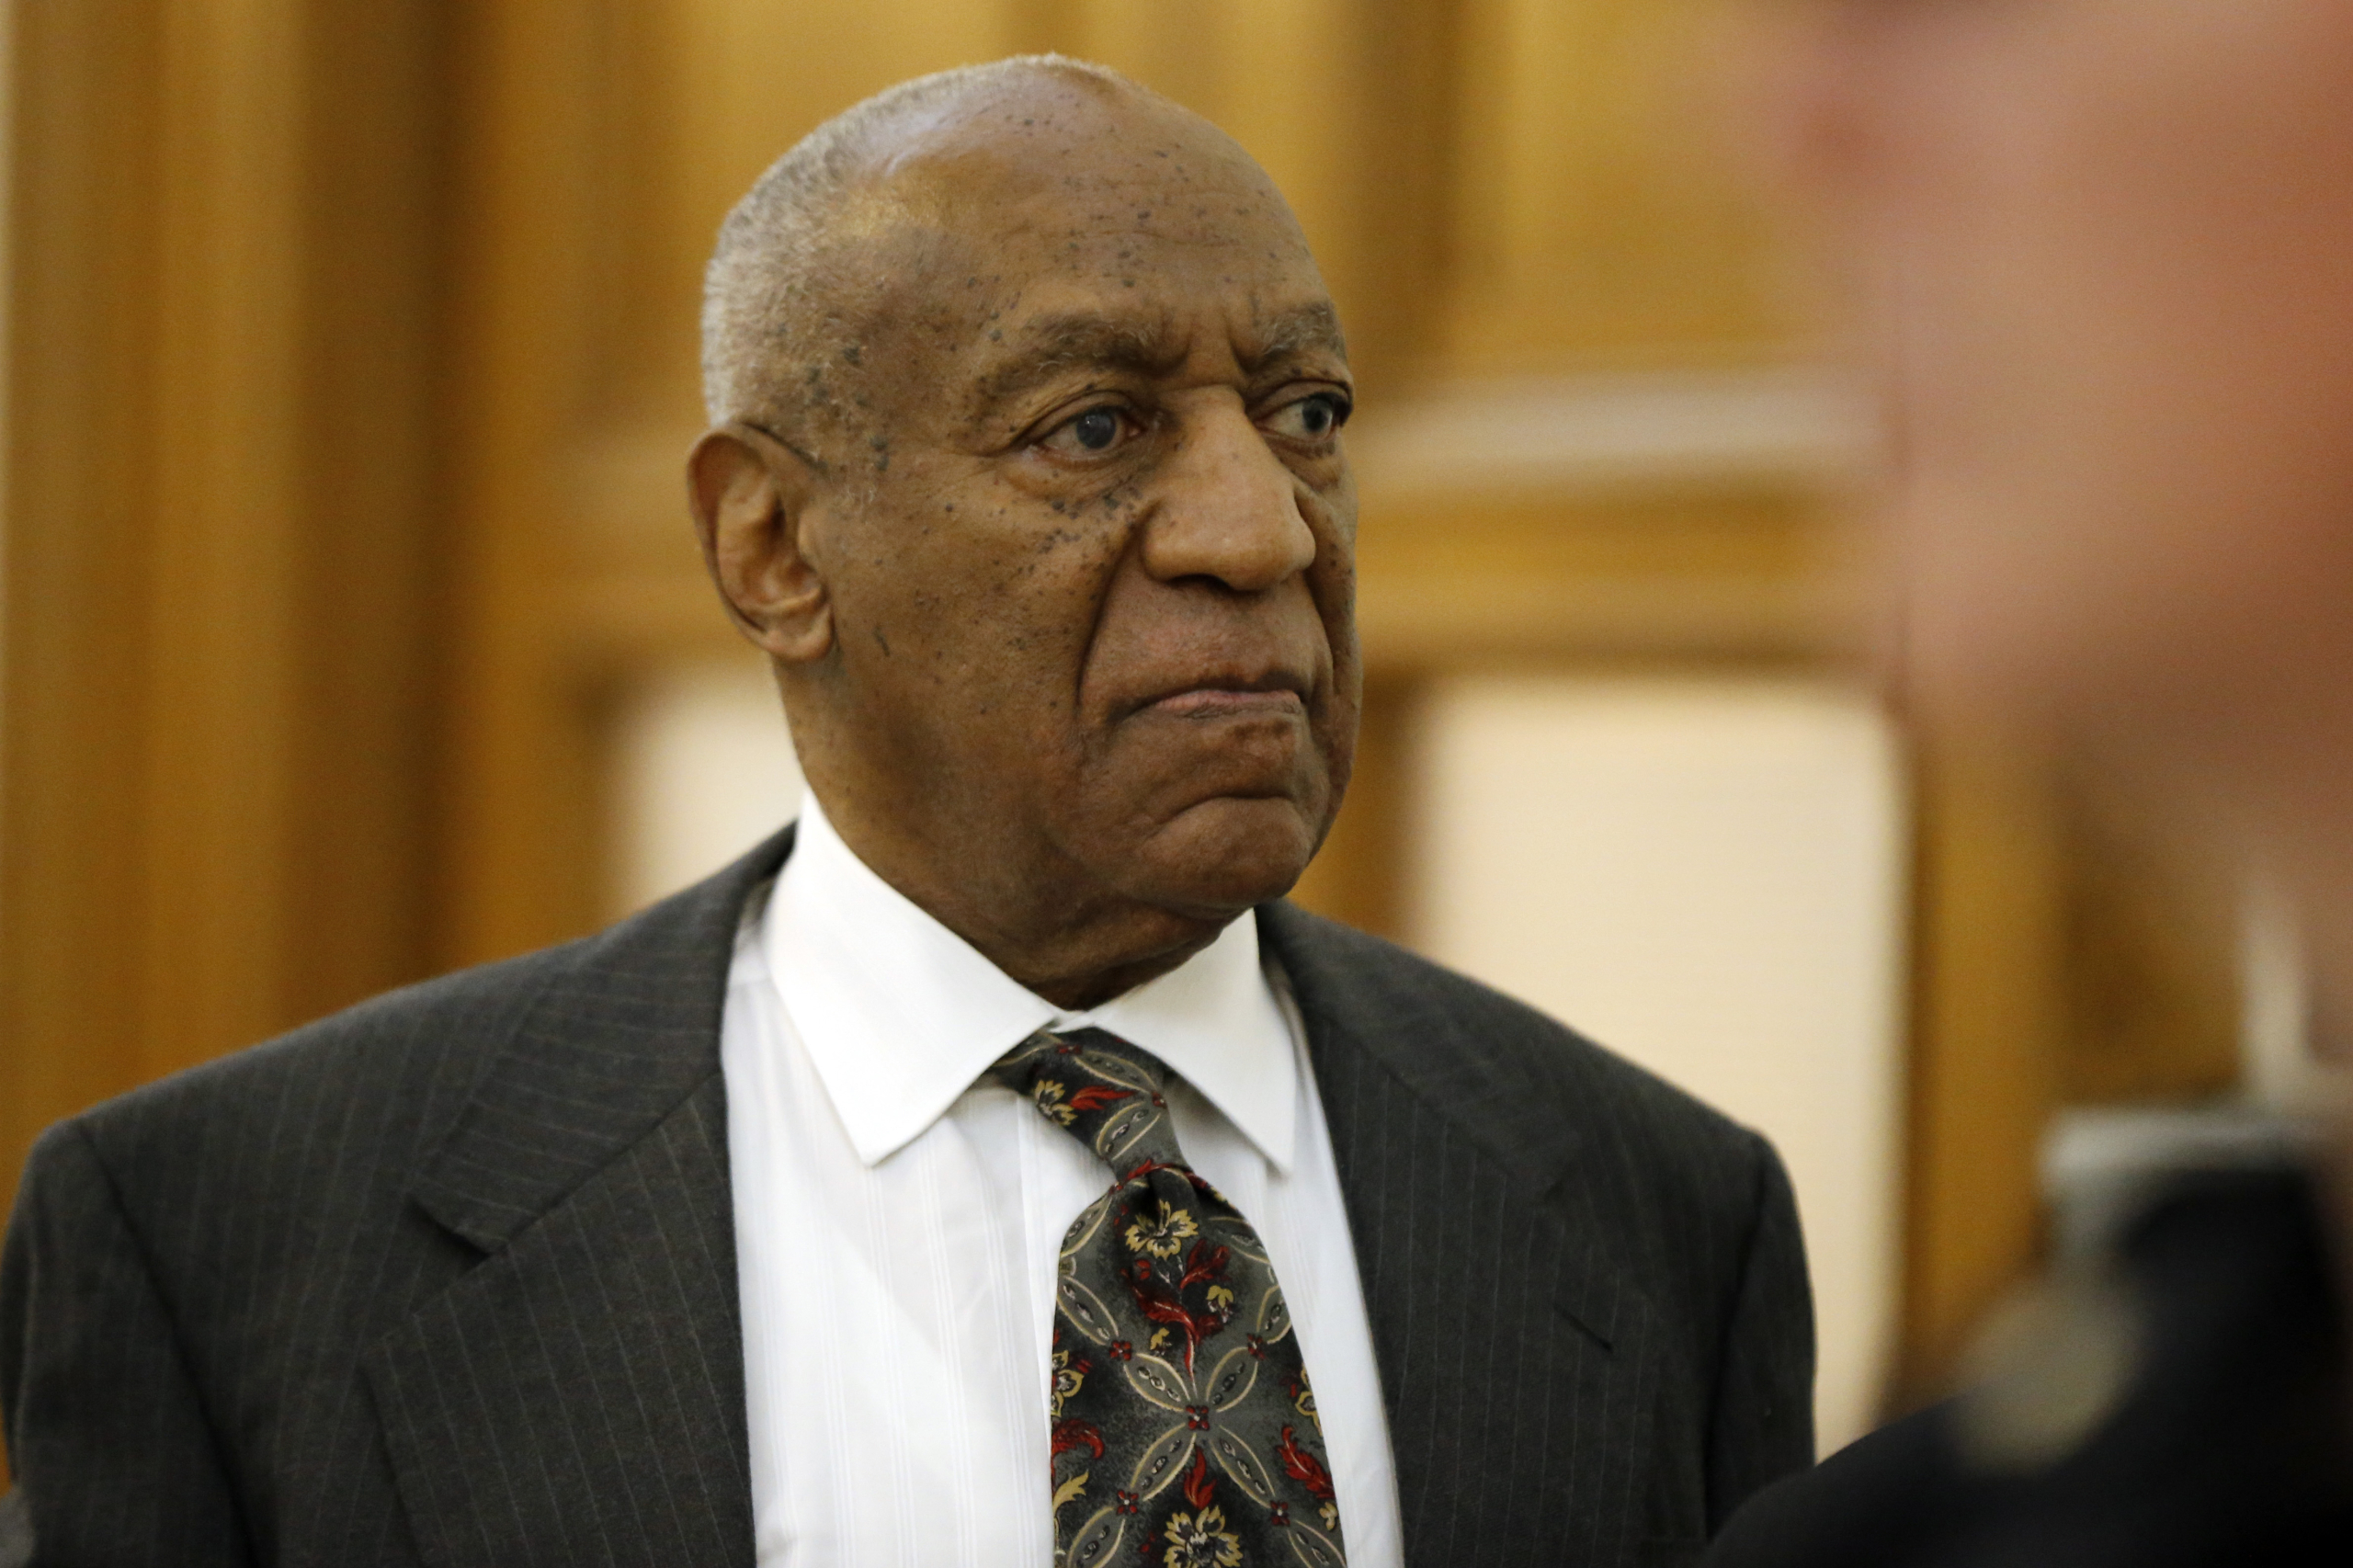 New Bill Cosby Documentary Trailer Suggests ‘A Lot Of People Knew’ (WATCH)